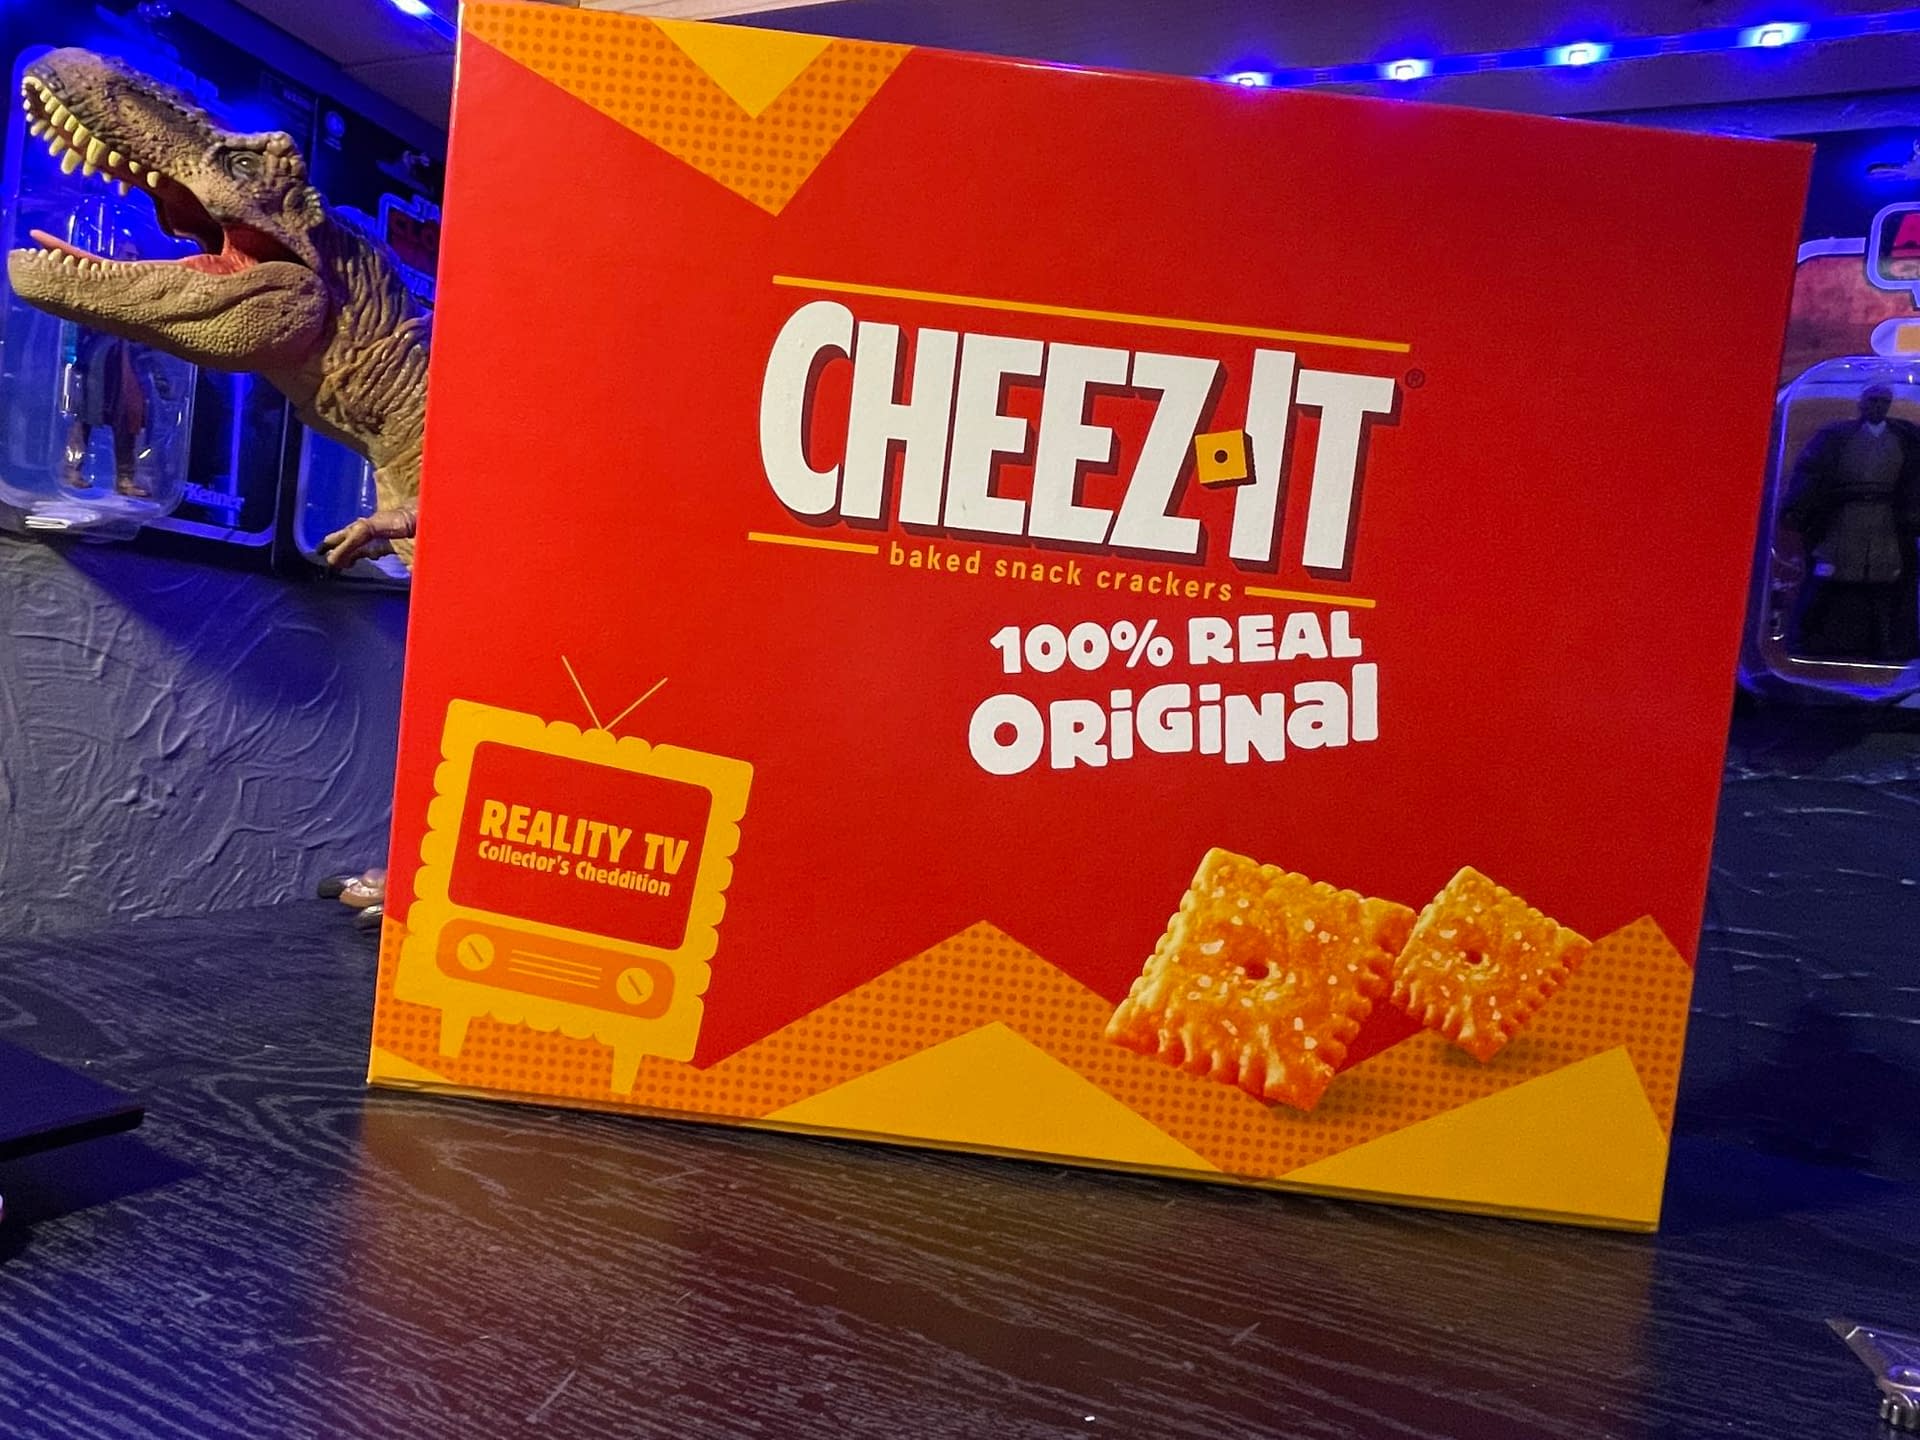 Cheez-It Gets Collectible with Reality TV Collector's Cheddition Boxes